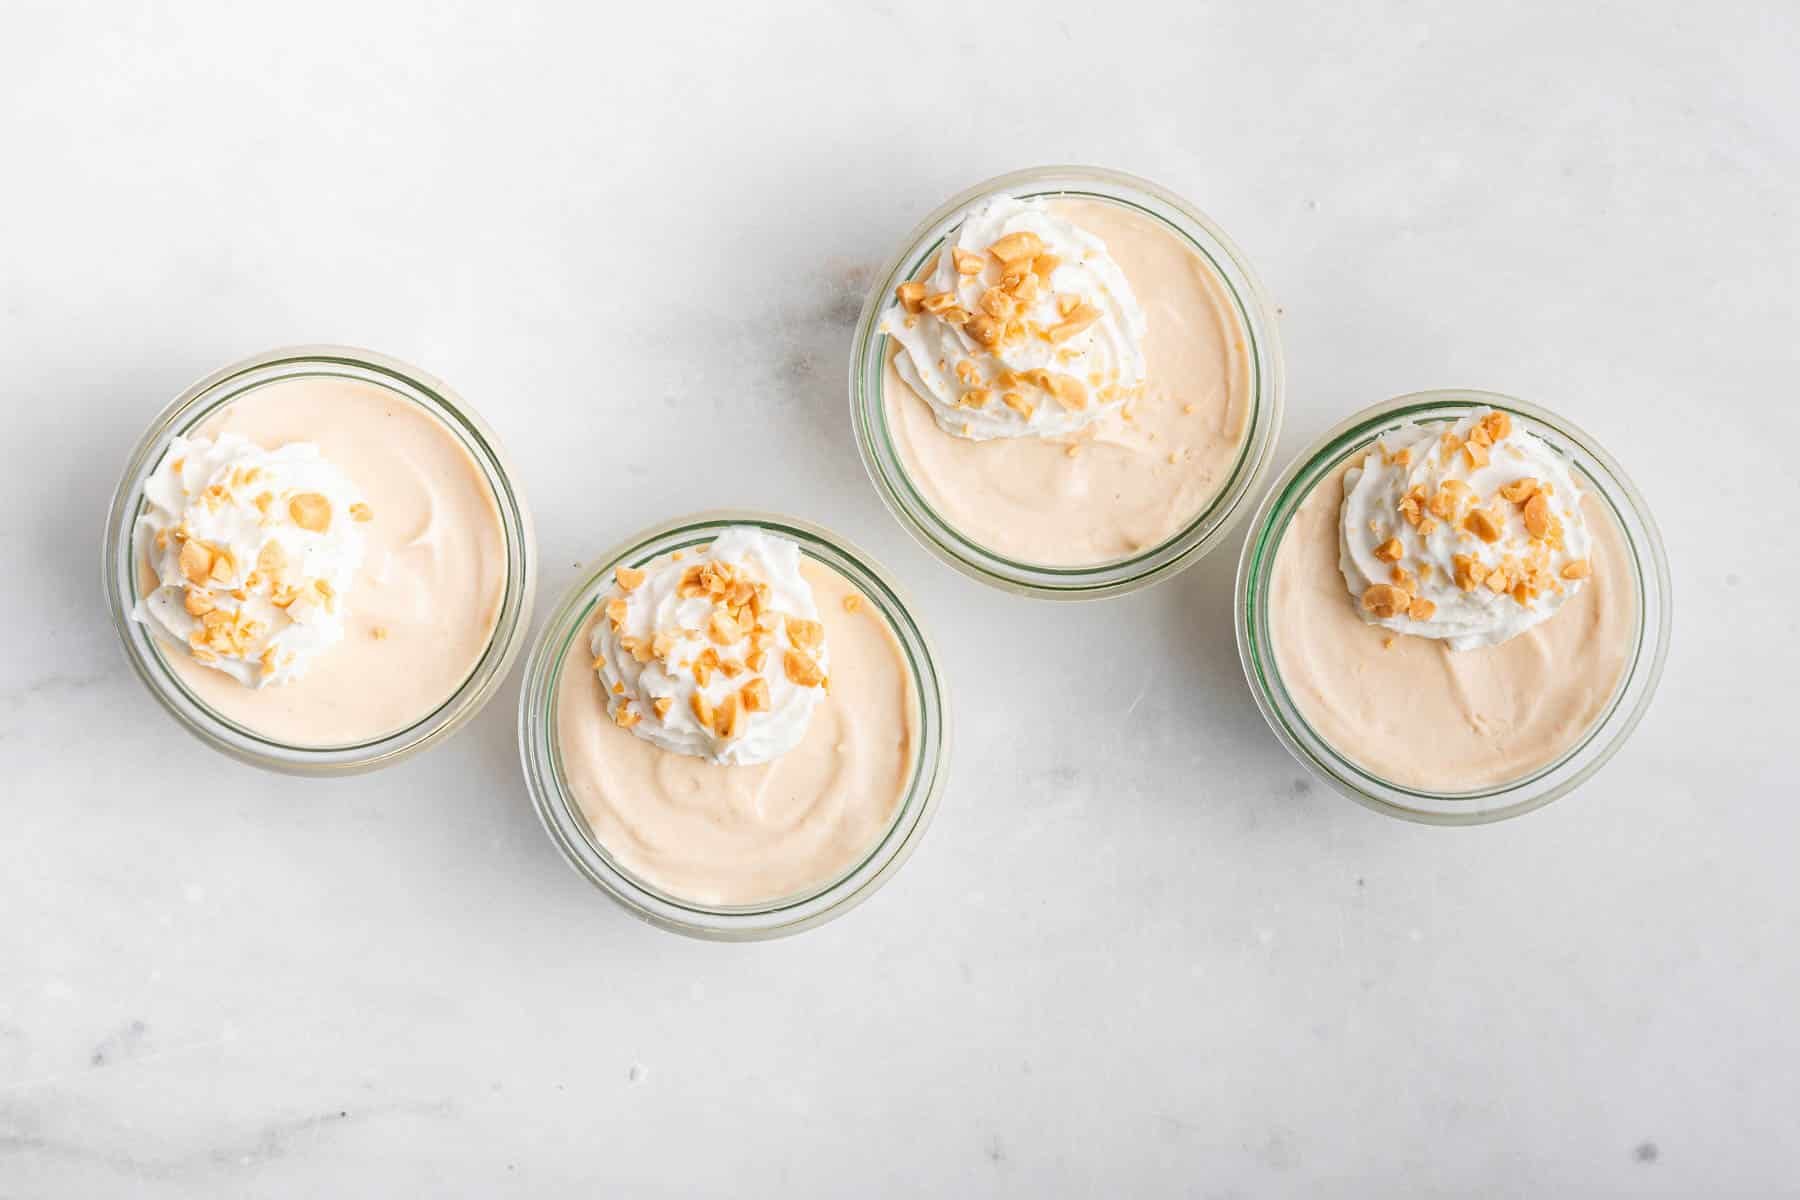 Horizontal image of 4 bowls of a light brown dessert with whipped cream and peanuts on top.